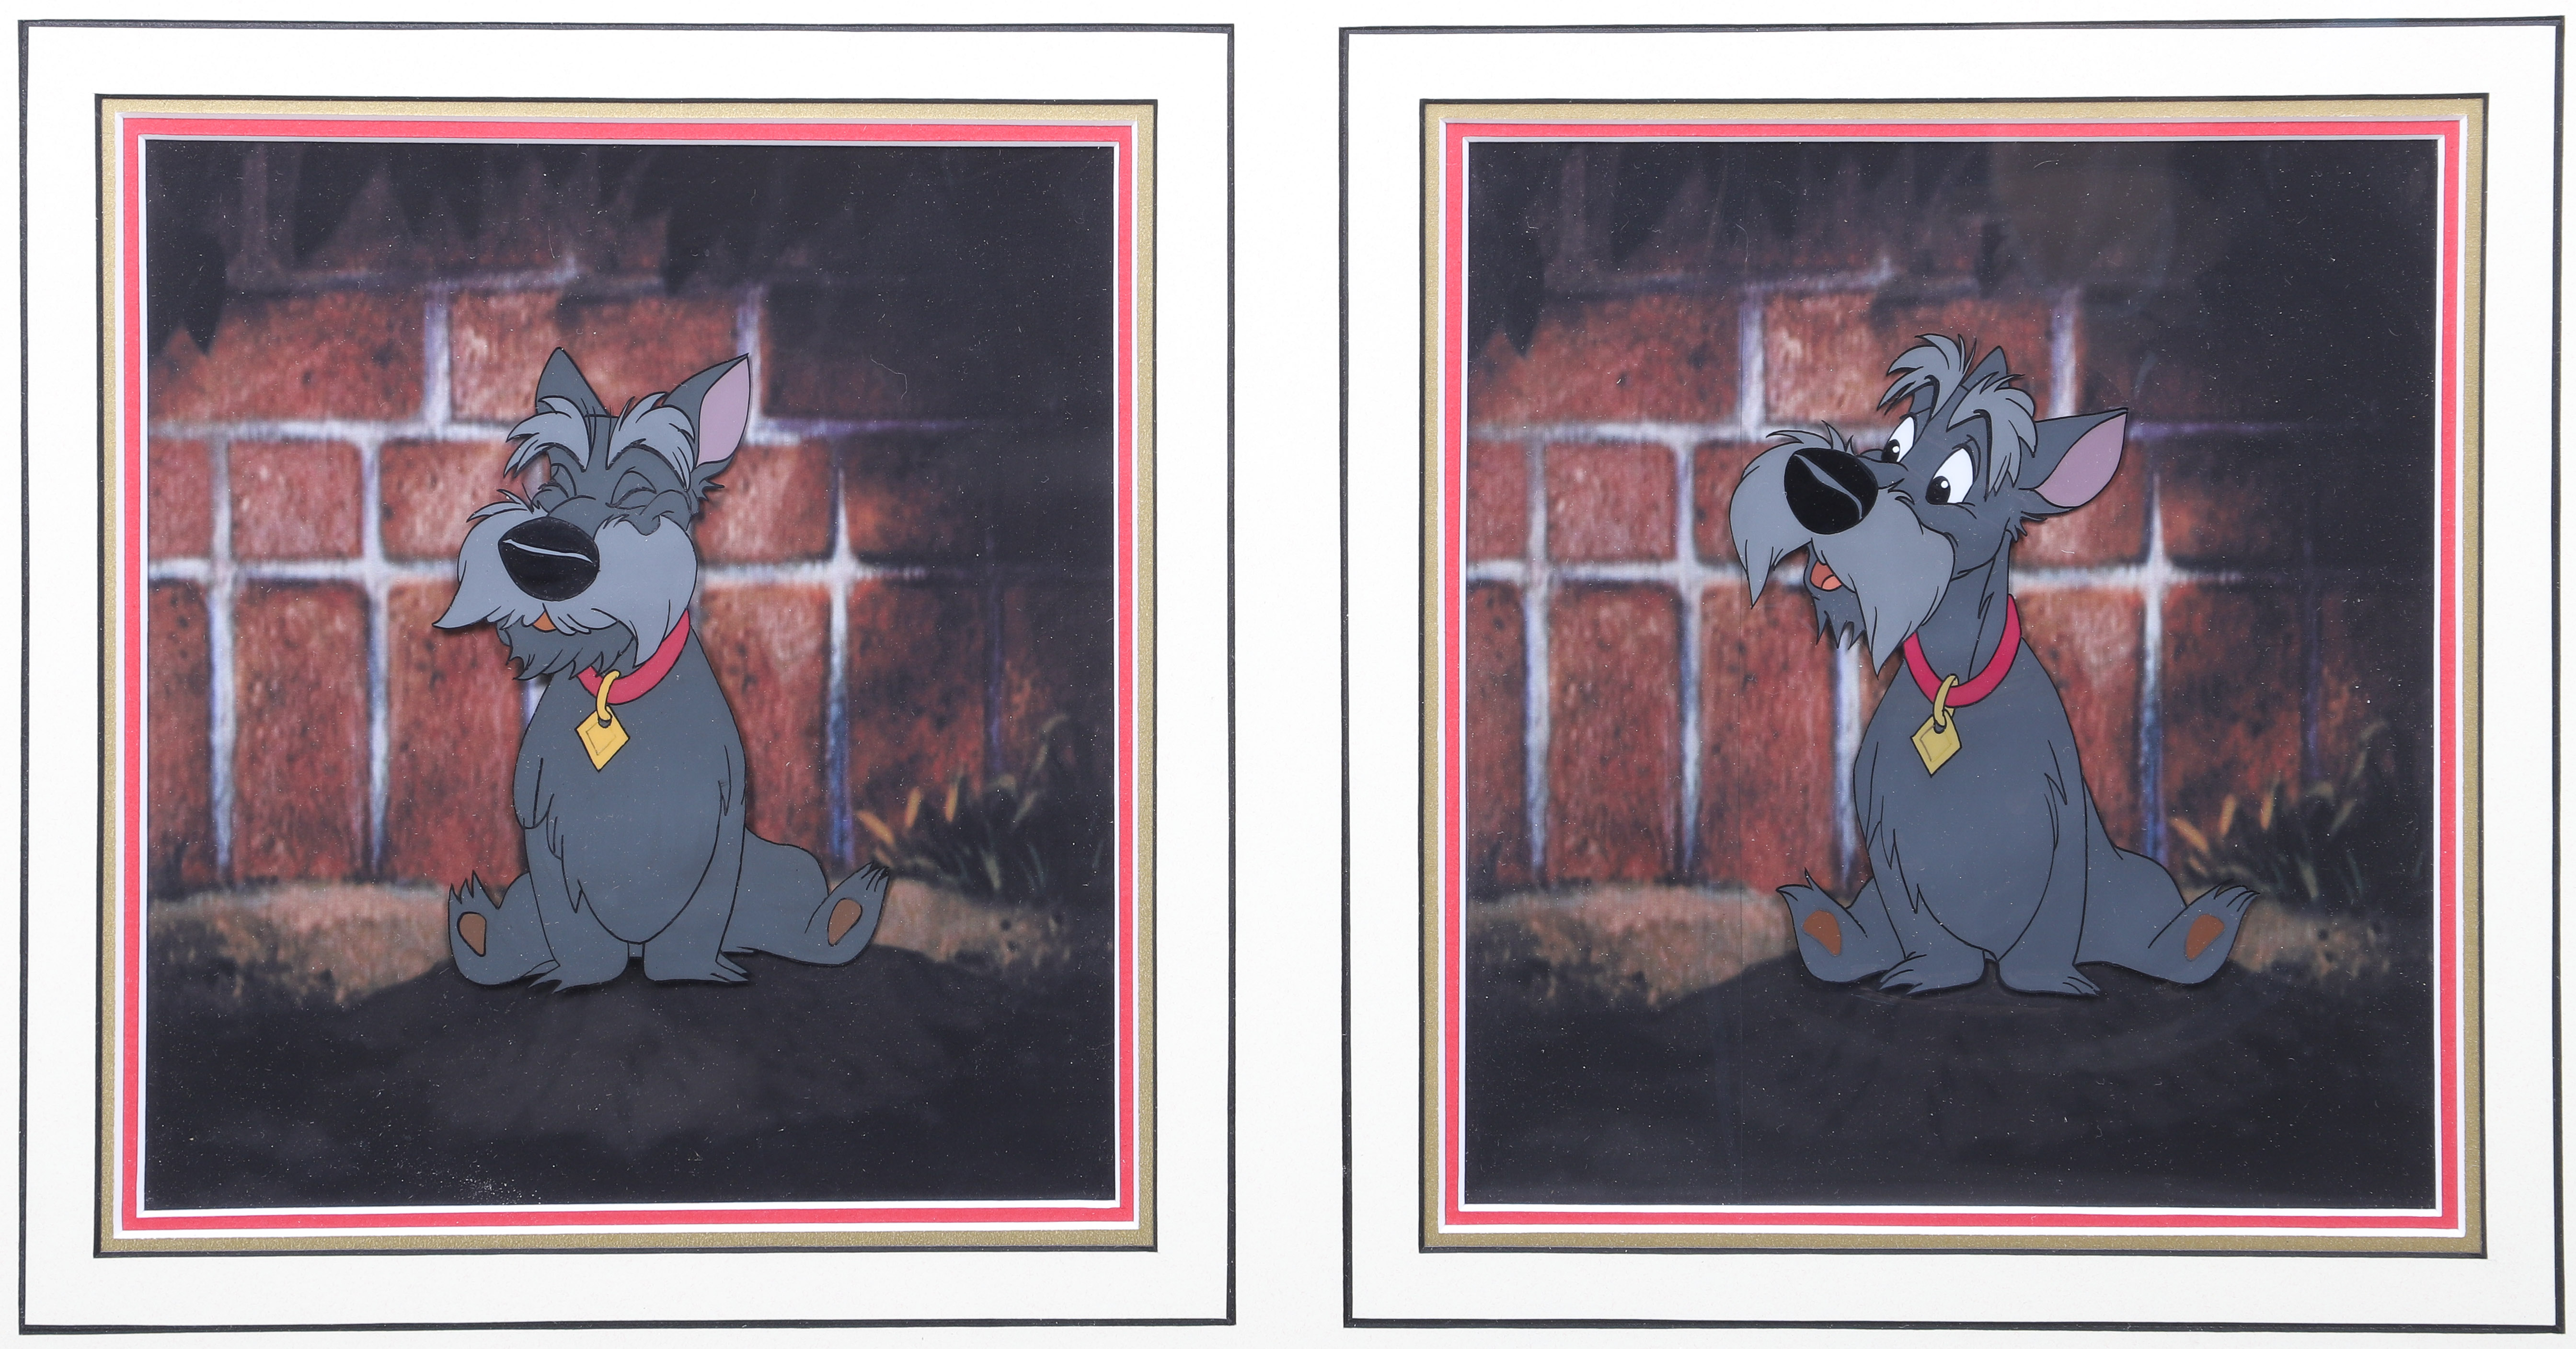 (2) Lady and the Tramp production cels